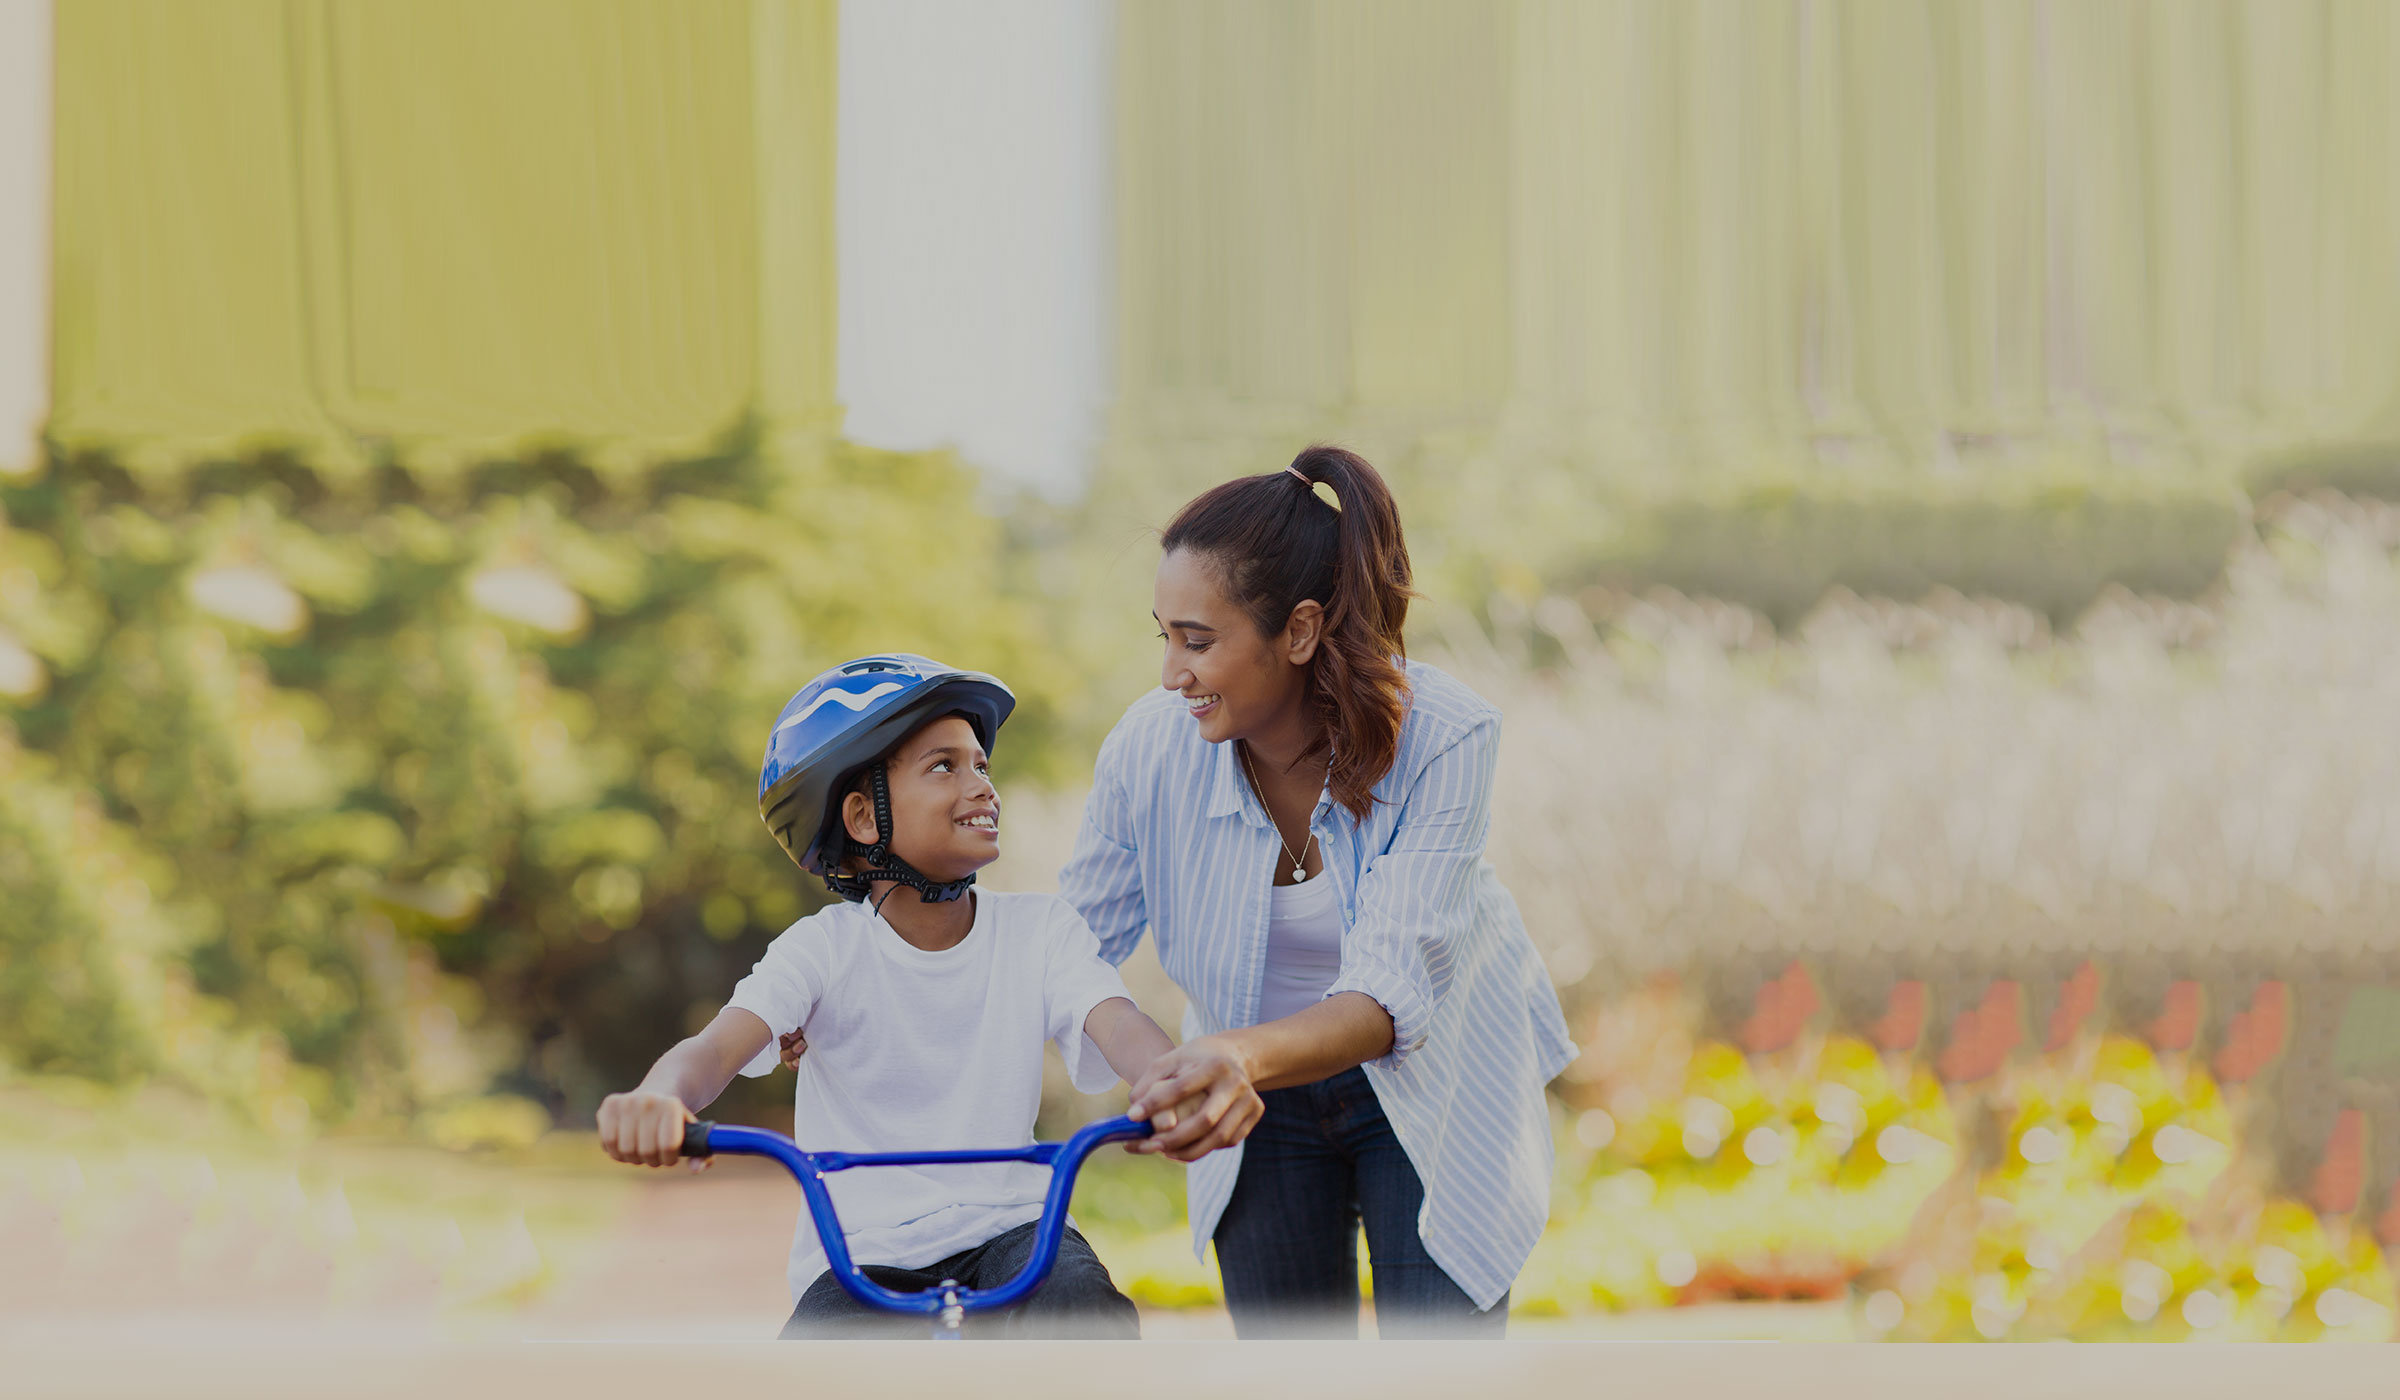 active-mom-with-child-on-bike4